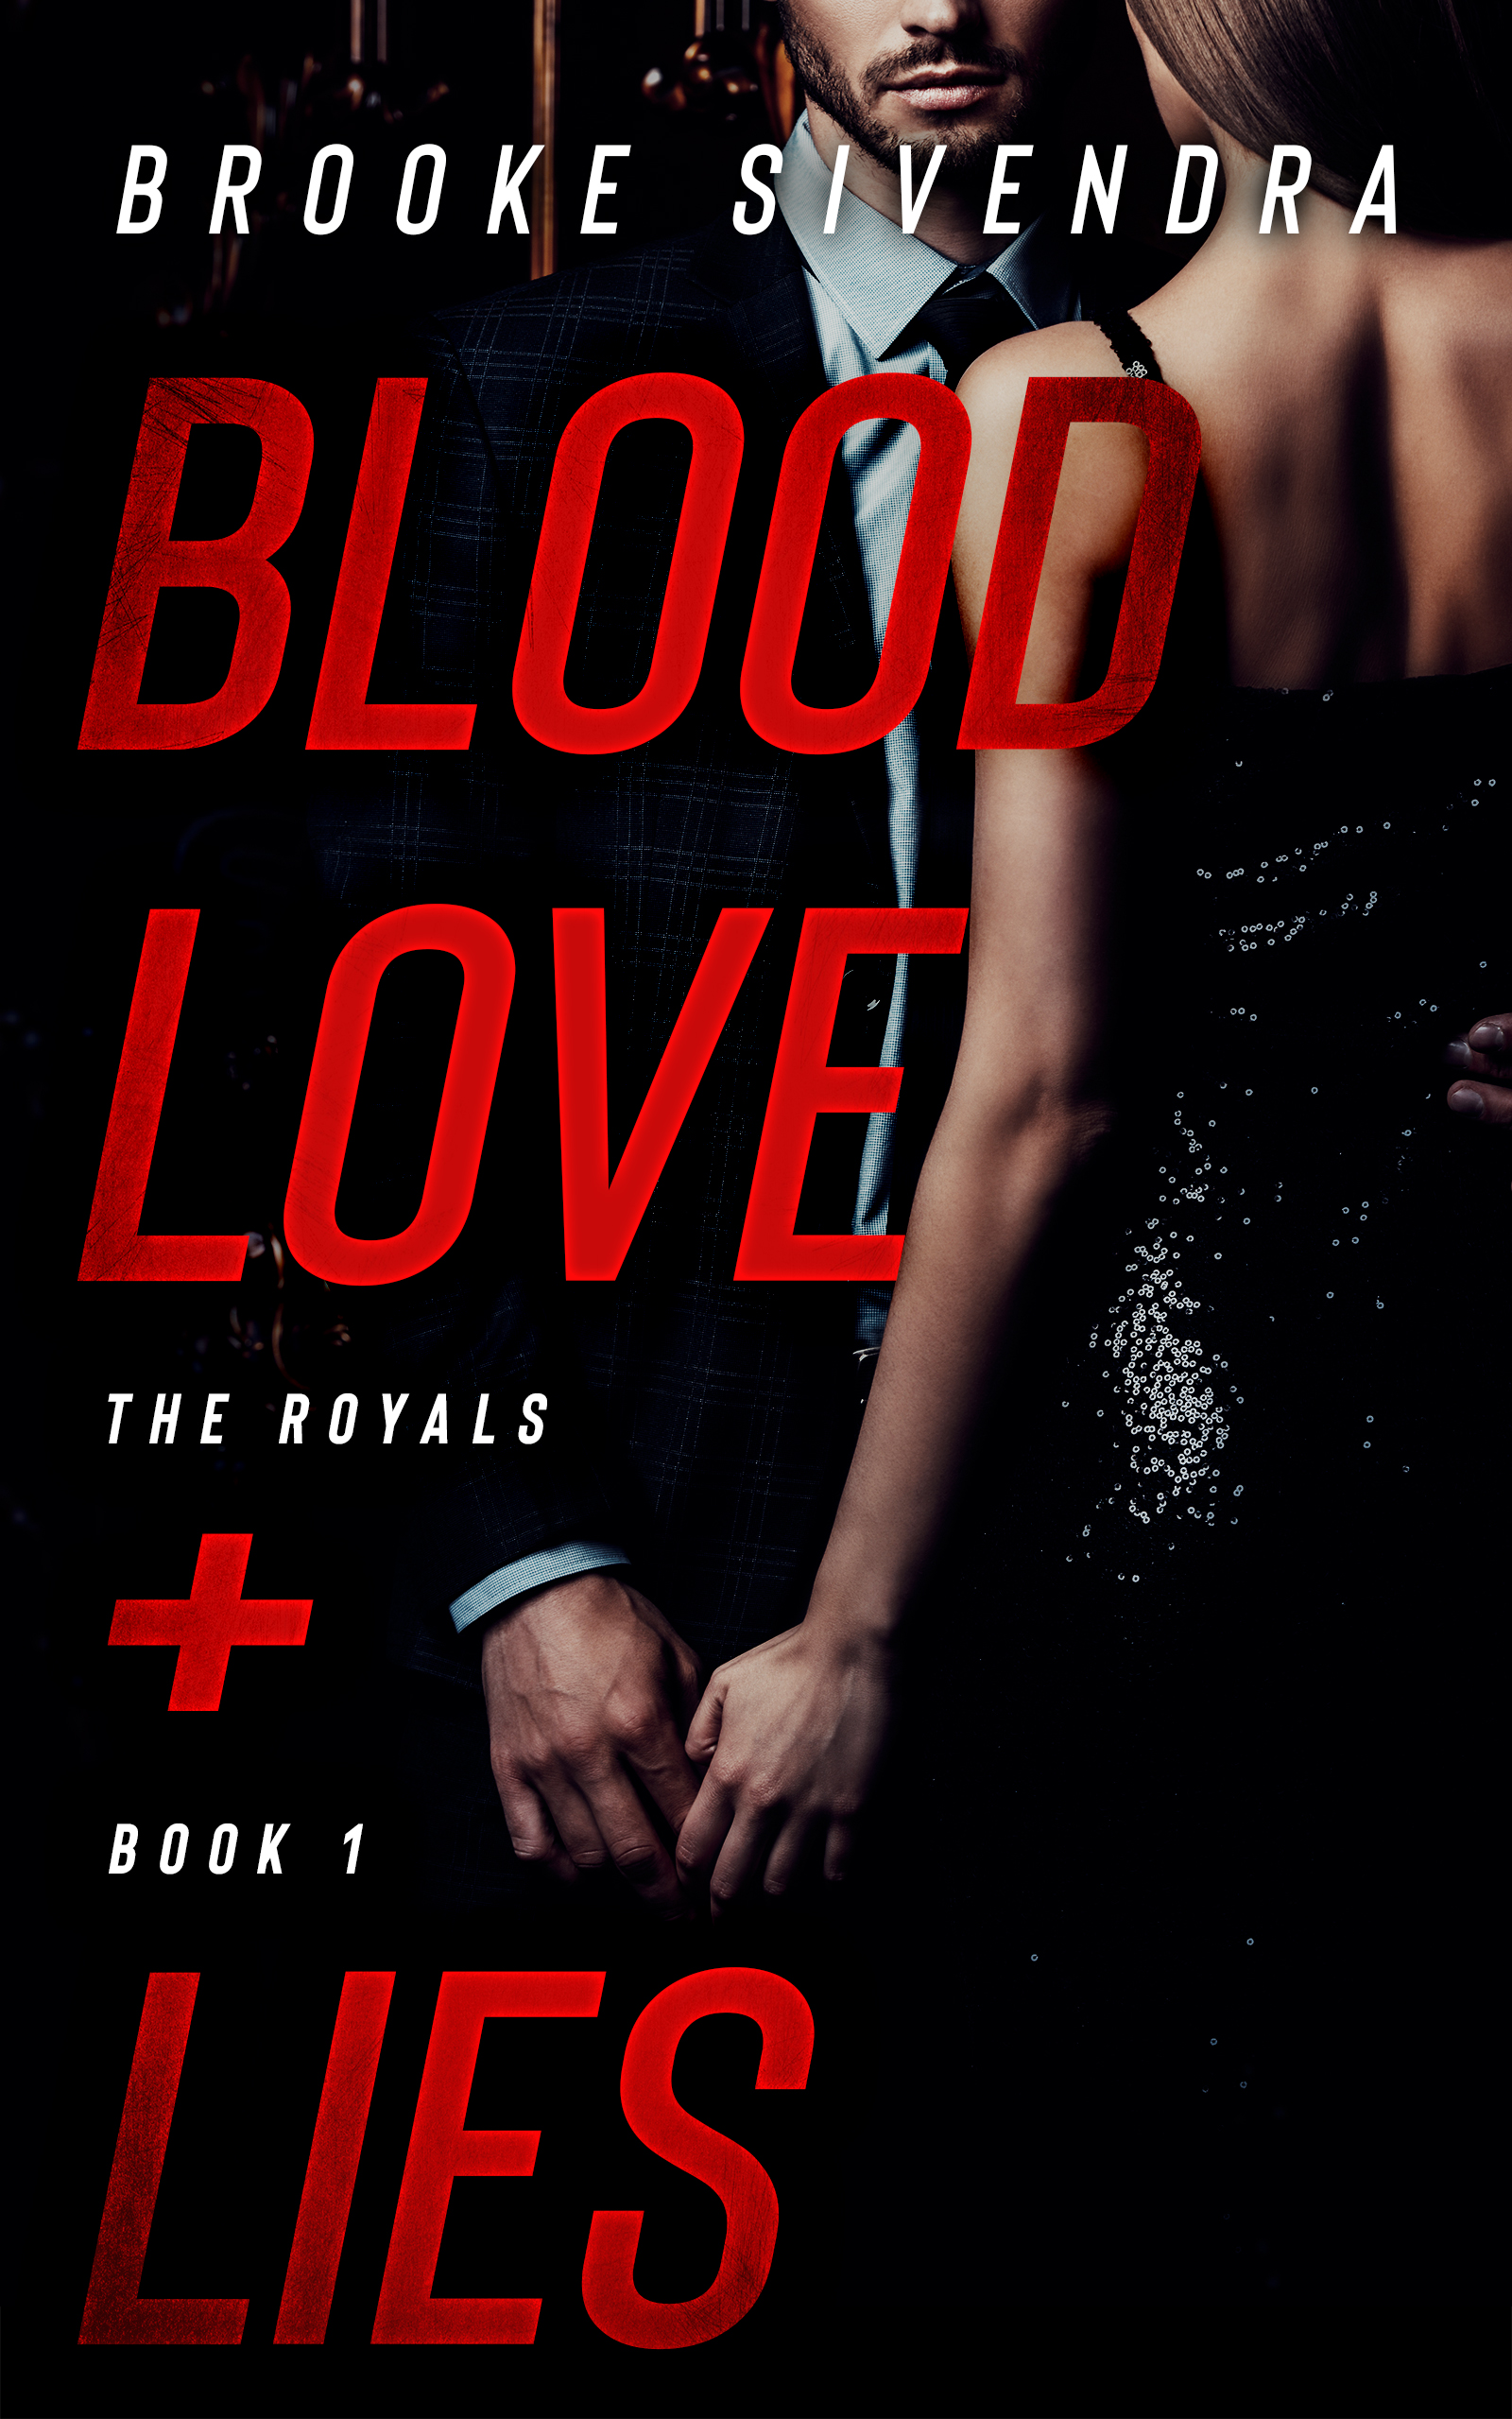 FREE: BLOOD, LOVE AND LIES (The Royals Series, Book 1): A Romantic Thriller by Brooke Sivendra